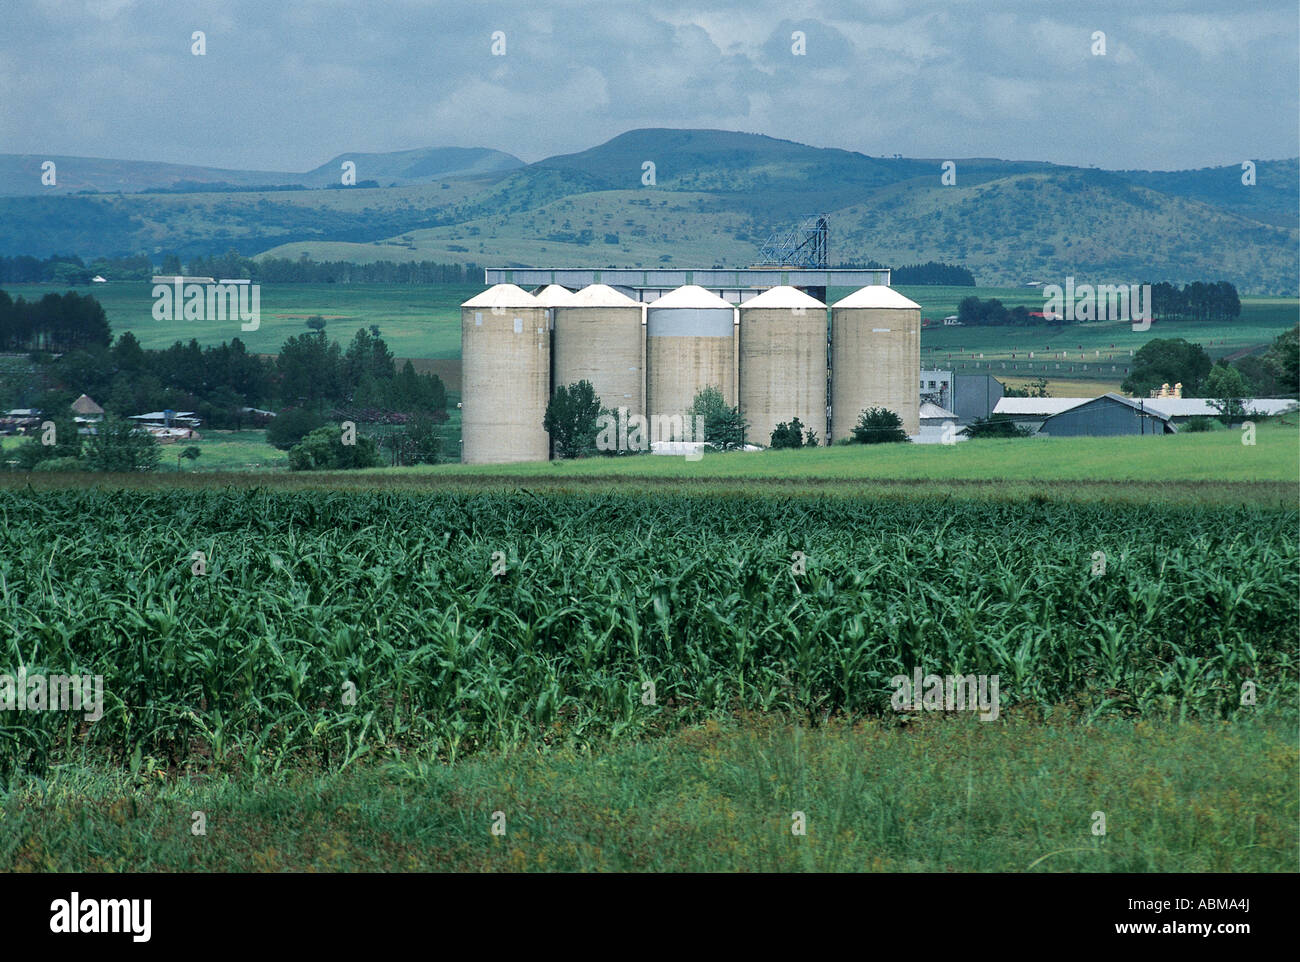 Maize and grain silos Natal Midlands South Africa The silos stand in an area of farmland with maize growing in the foreground Stock Photo